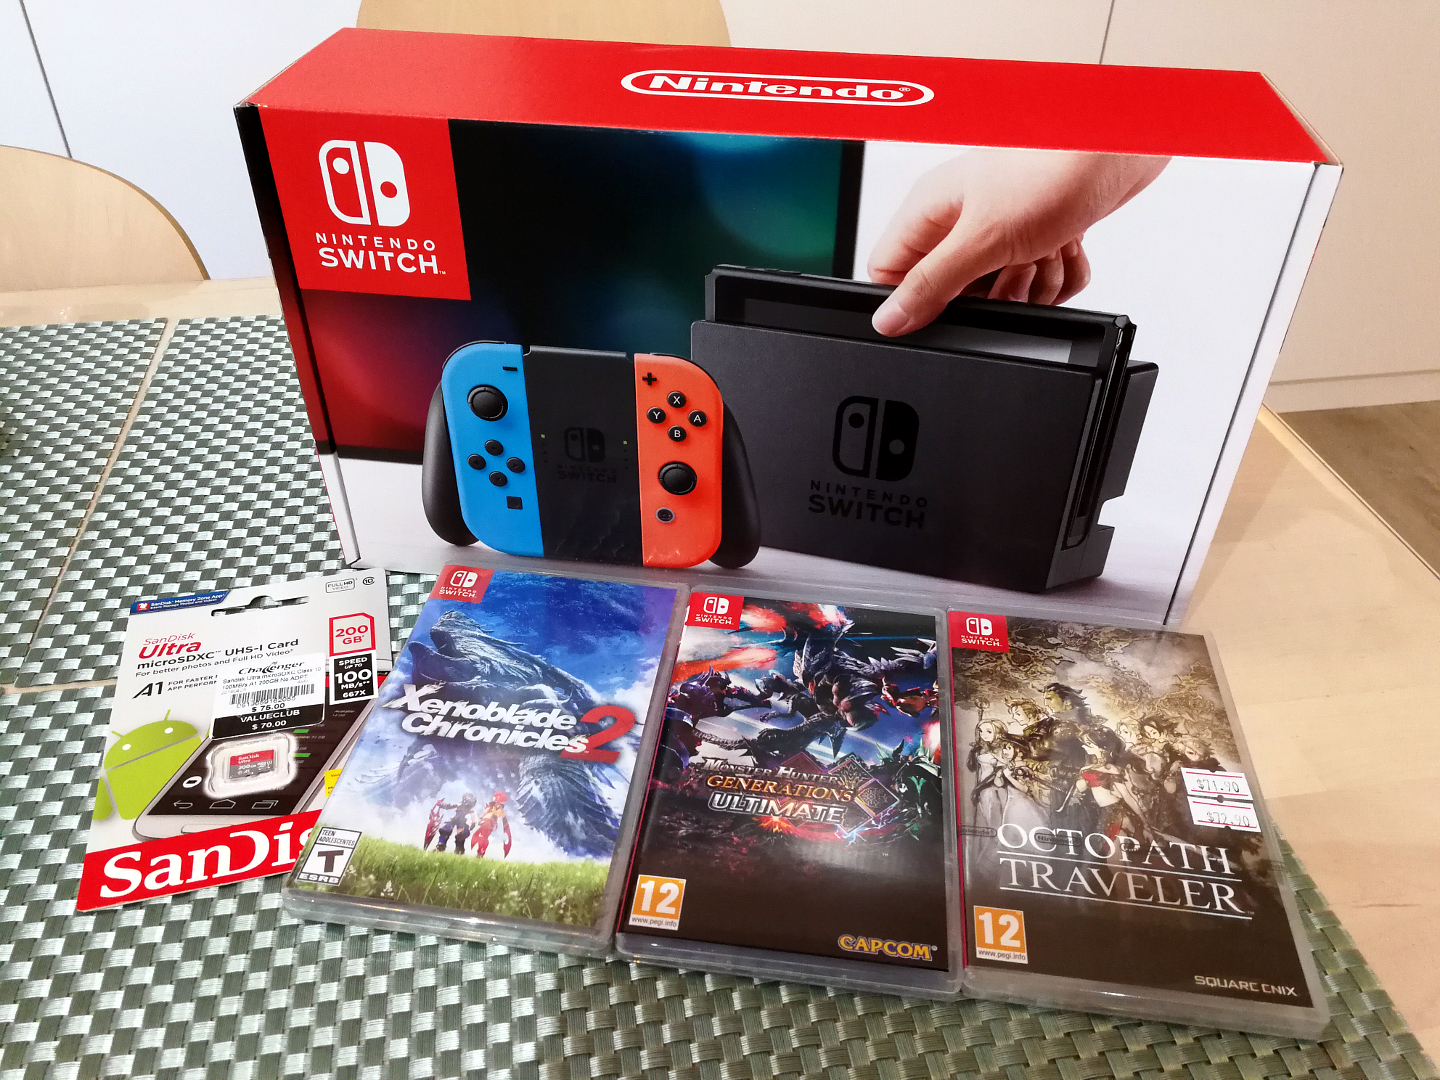 Buy Nintendo Switch in Singapore nintendo switch sg Discover cheap clothes